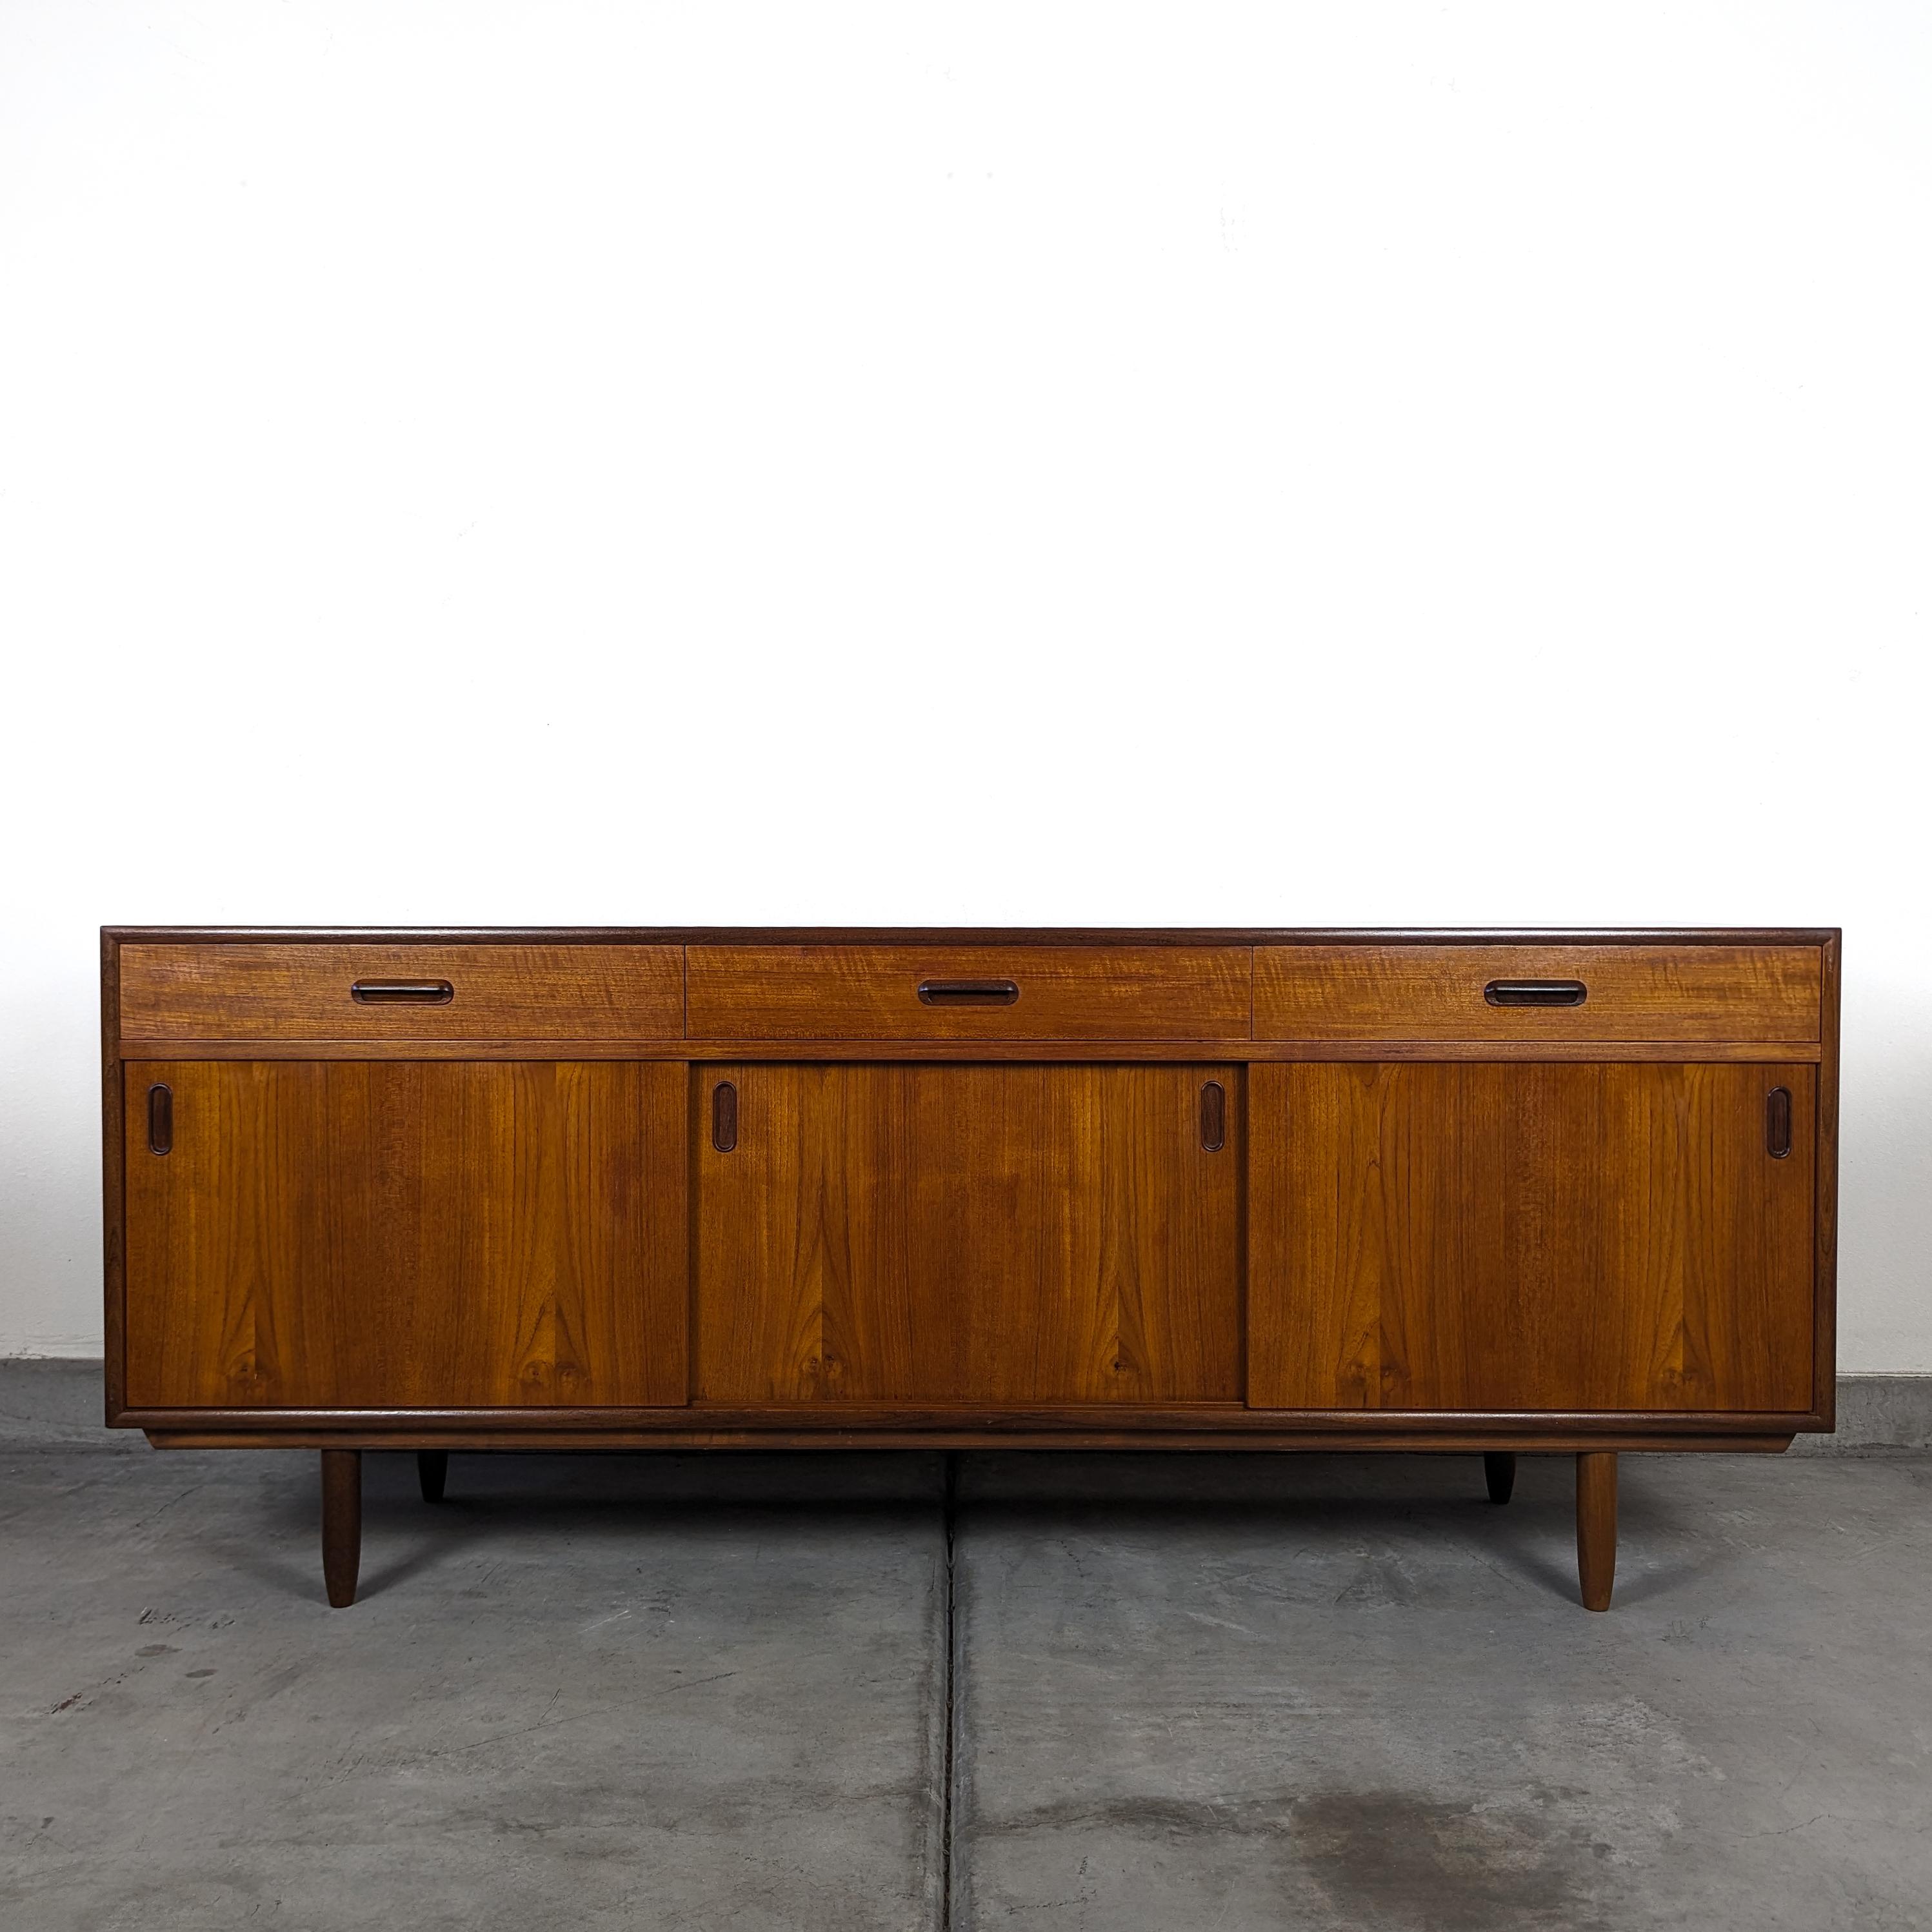 Experience the allure of Scandinavian design history with this mid century modern teak credenza/buffet. Originating from the heart of Scandinavia, where some of the most iconic and enduring furniture designs were born, this piece is a true testament